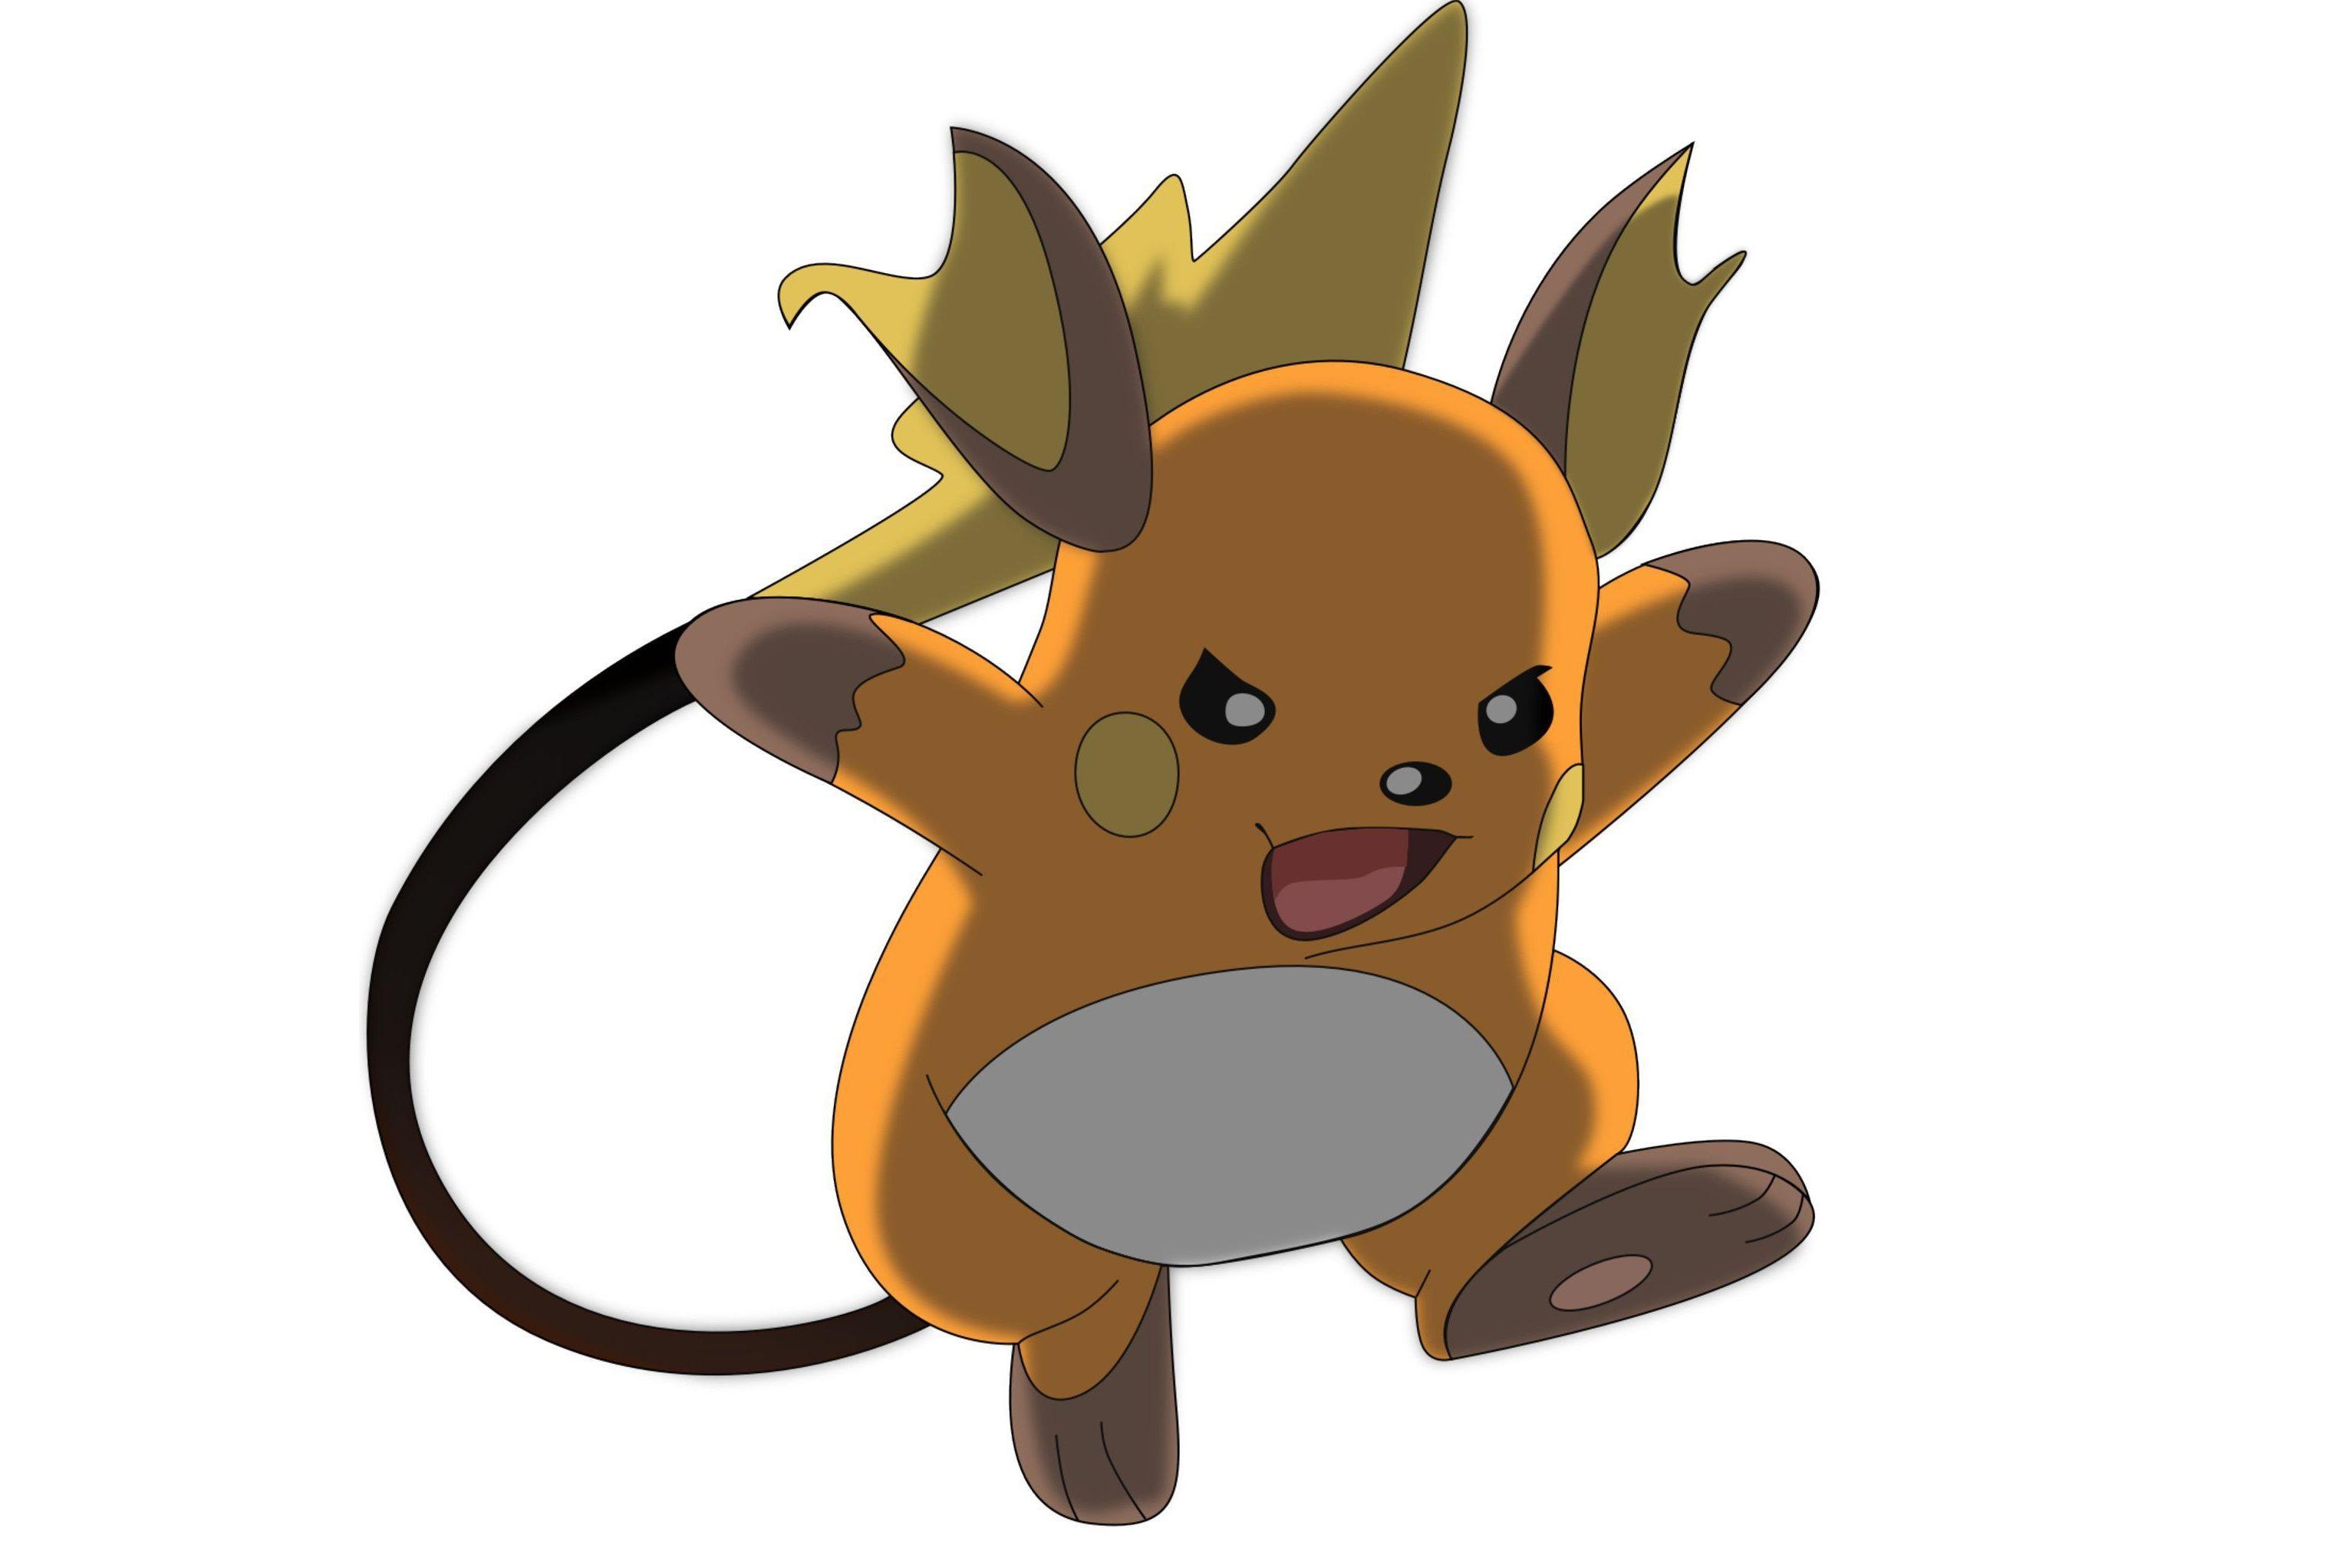 Raichu Wallpapers Image Photos Pictures Backgrounds.